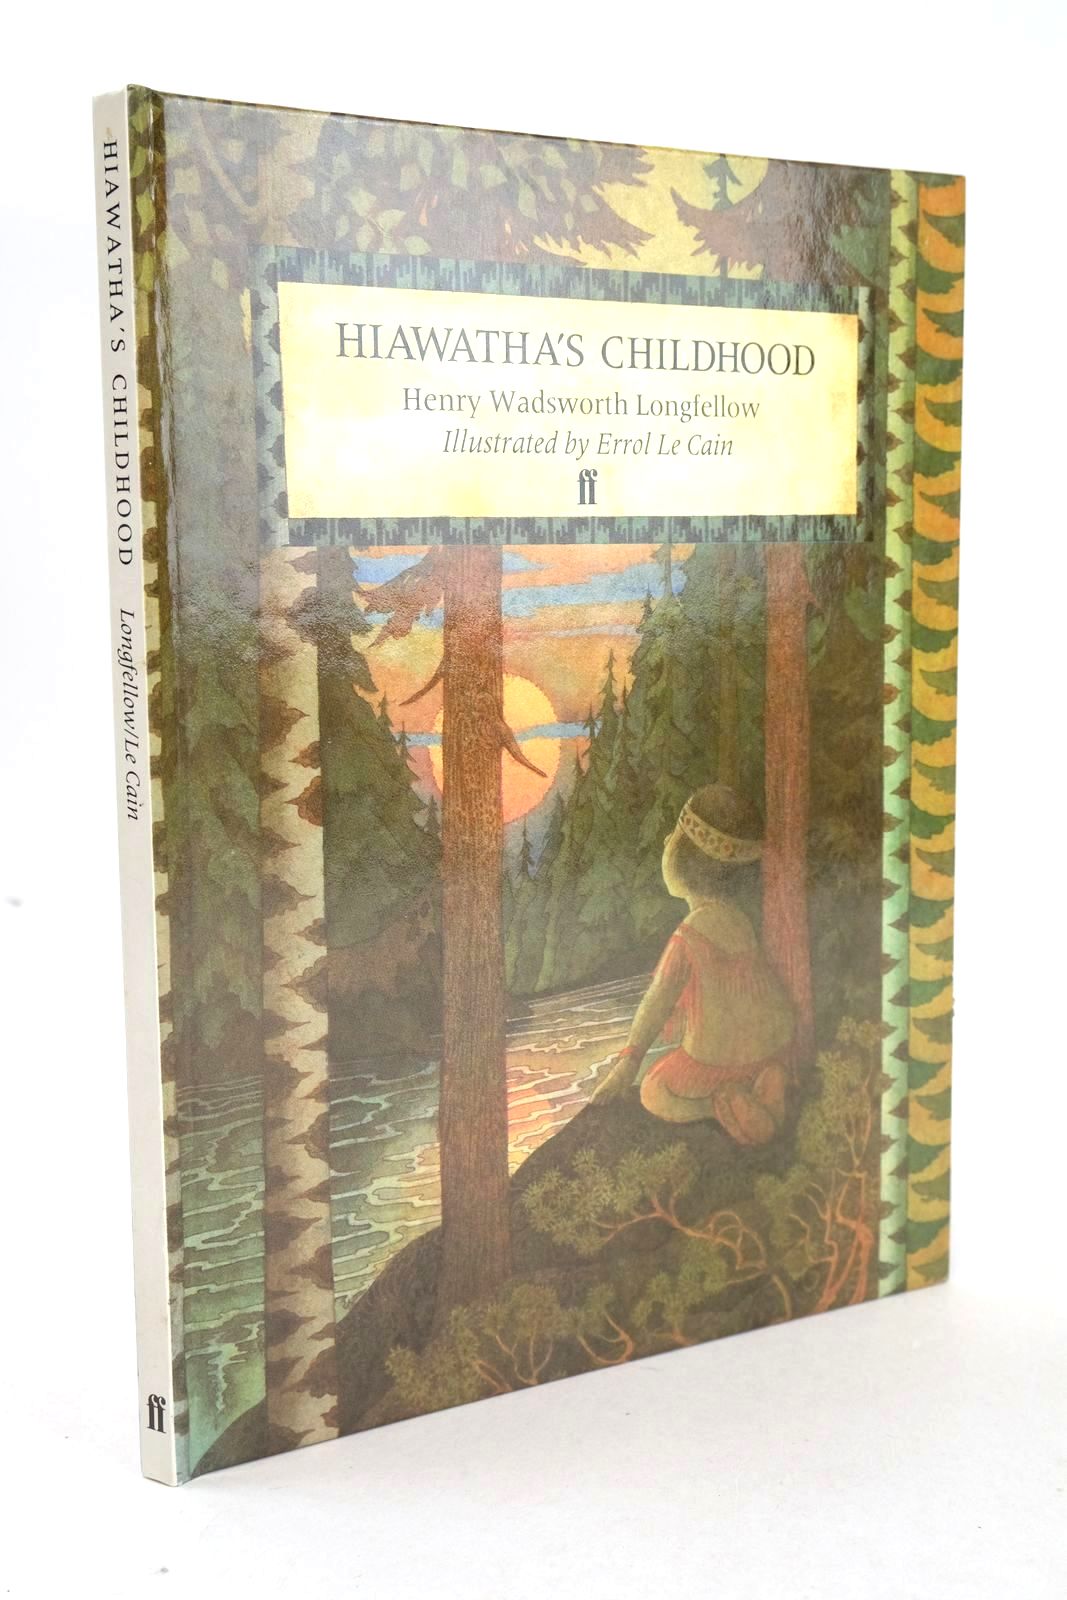 Photo of HIAWATHA'S CHILDHOOD written by Longfellow, Henry Wadsworth illustrated by Le Cain, Errol published by Faber &amp; Faber (STOCK CODE: 1326305)  for sale by Stella & Rose's Books